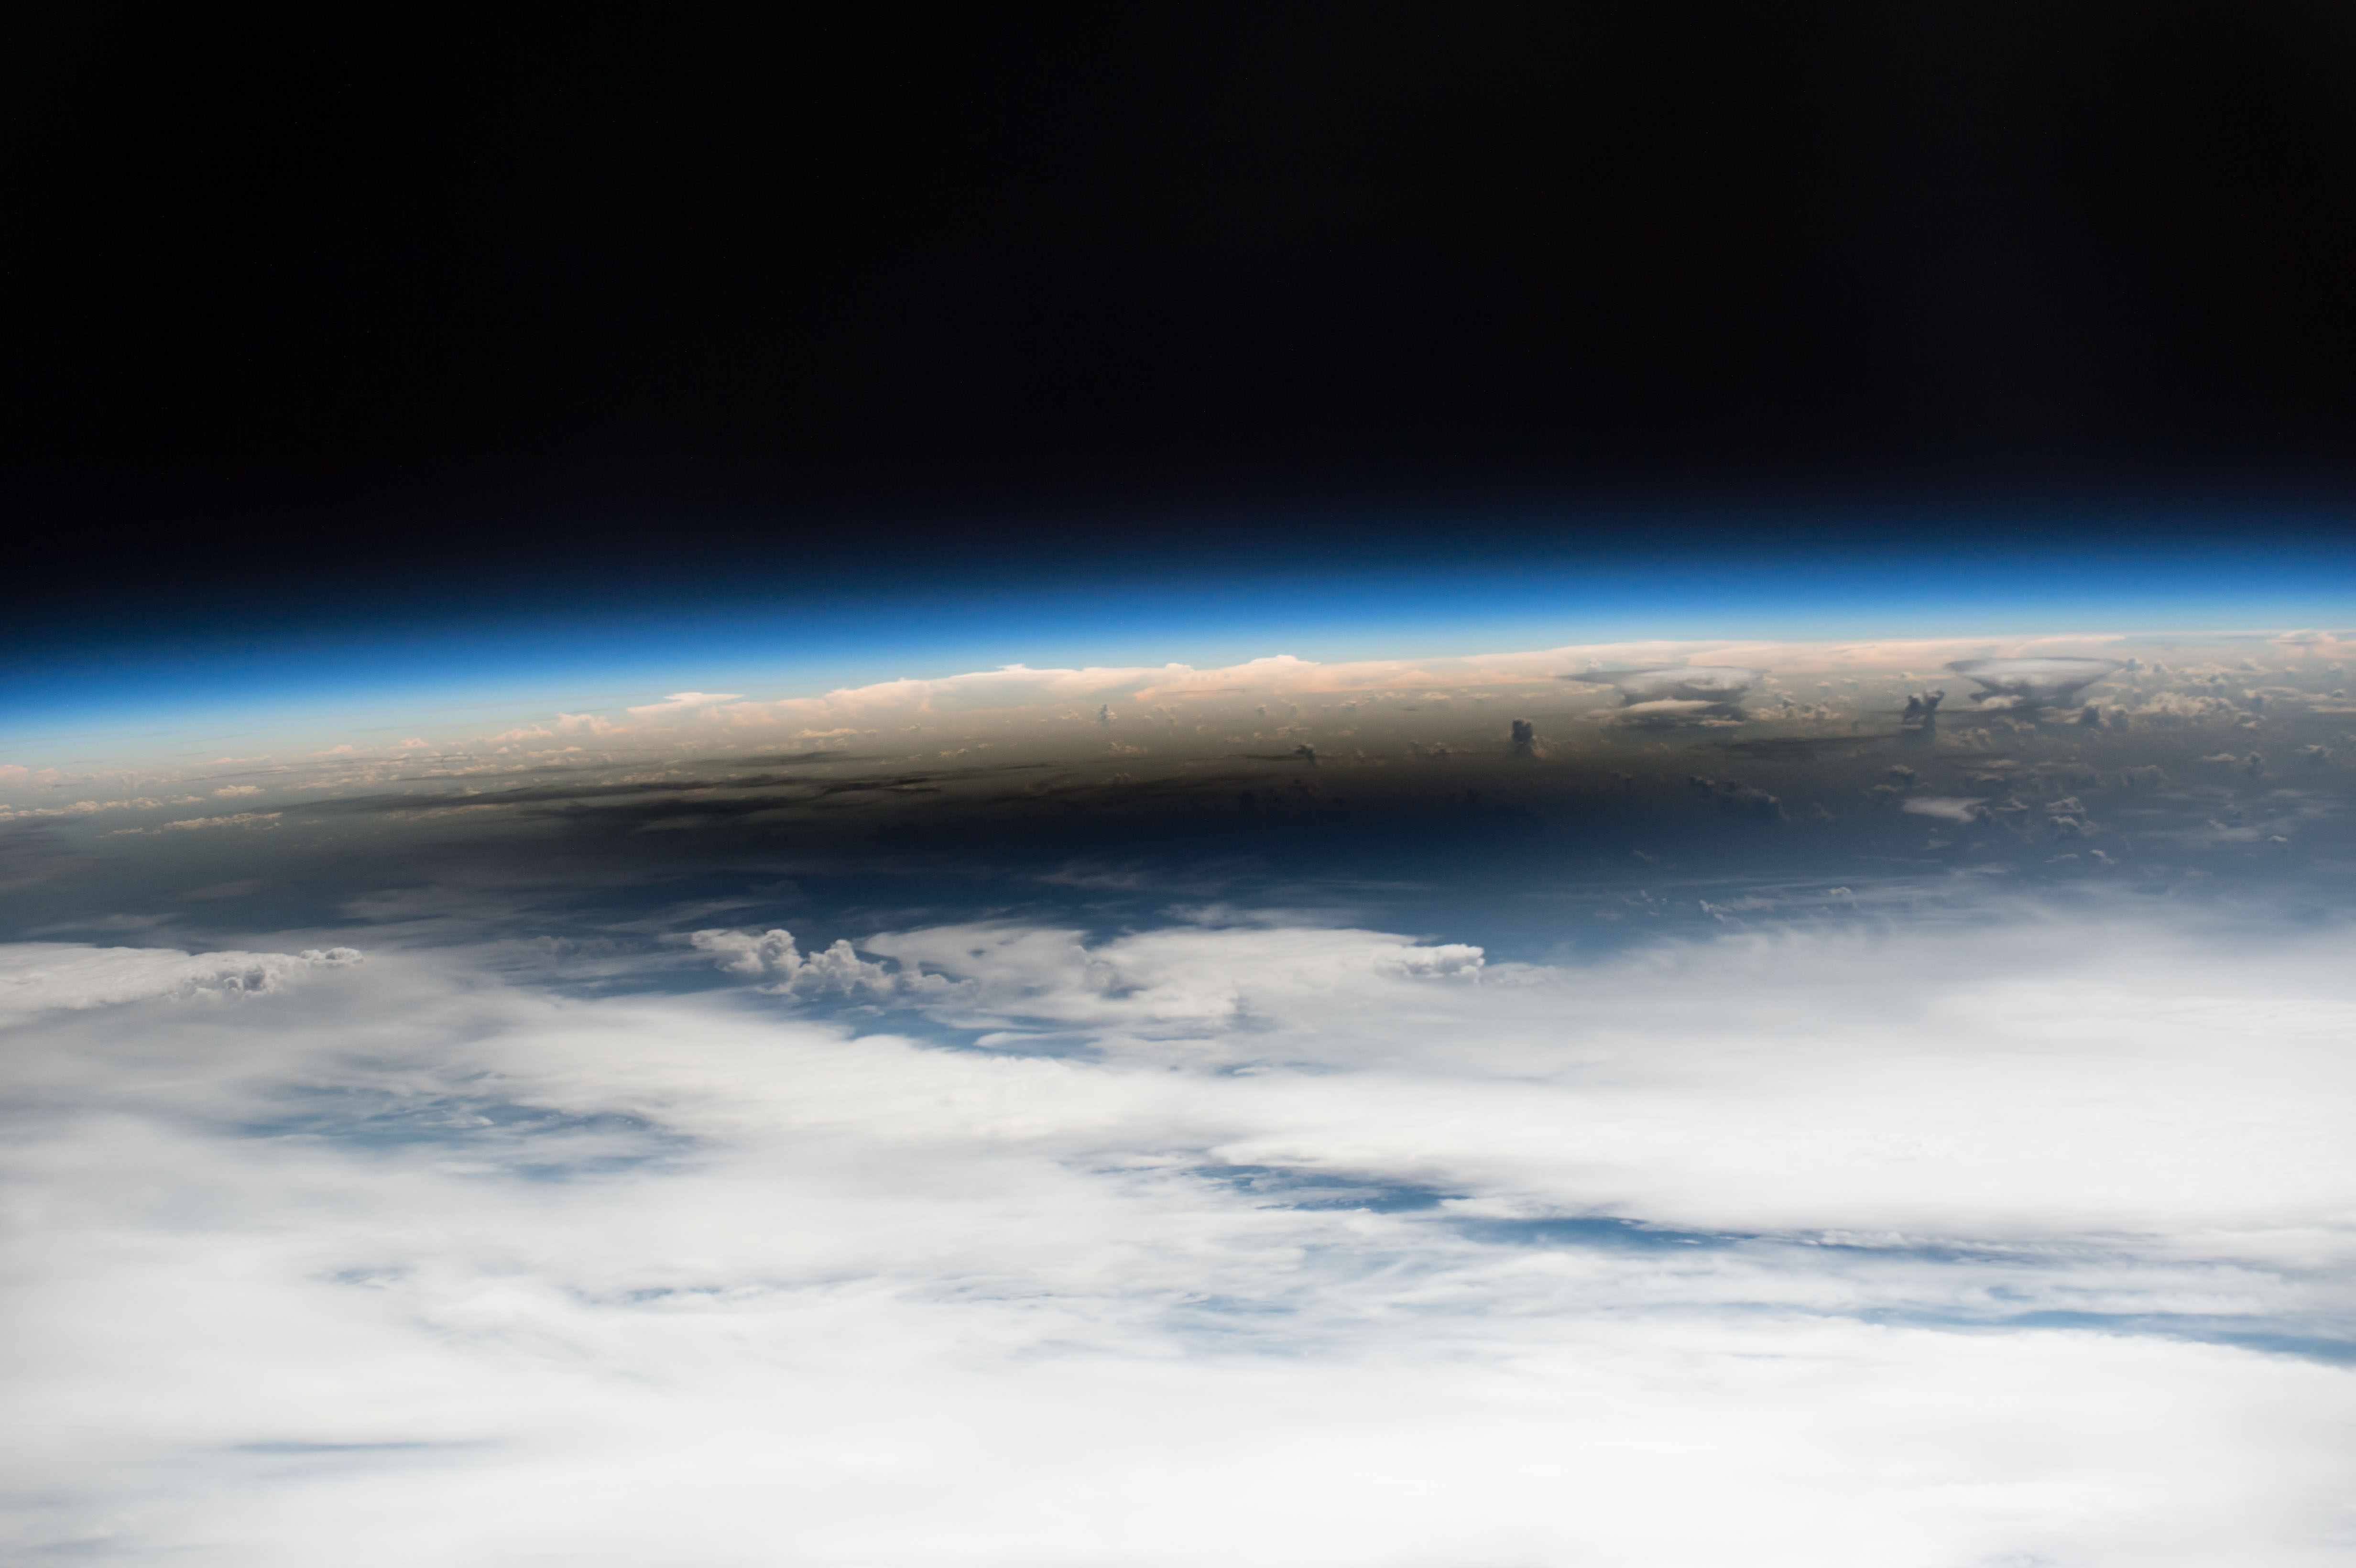 iss052e056122 (Aug. 21, 2017) --- As millions of people across the United States experienced a total eclipse as the umbra, or moon’s shadow passed over them, only six people witnessed the umbra from space. Viewing the eclipse from orbit were NASA’s Randy Bresnik, Jack Fischer and Peggy Whitson, ESA (European Space Agency’s) Paolo Nespoli, and Roscosmos’ Commander Fyodor Yurchikhin and Sergey Ryazanskiy. The space station crossed the path of the eclipse three times as it orbited above the continental United States at an altitude of 250 miles.